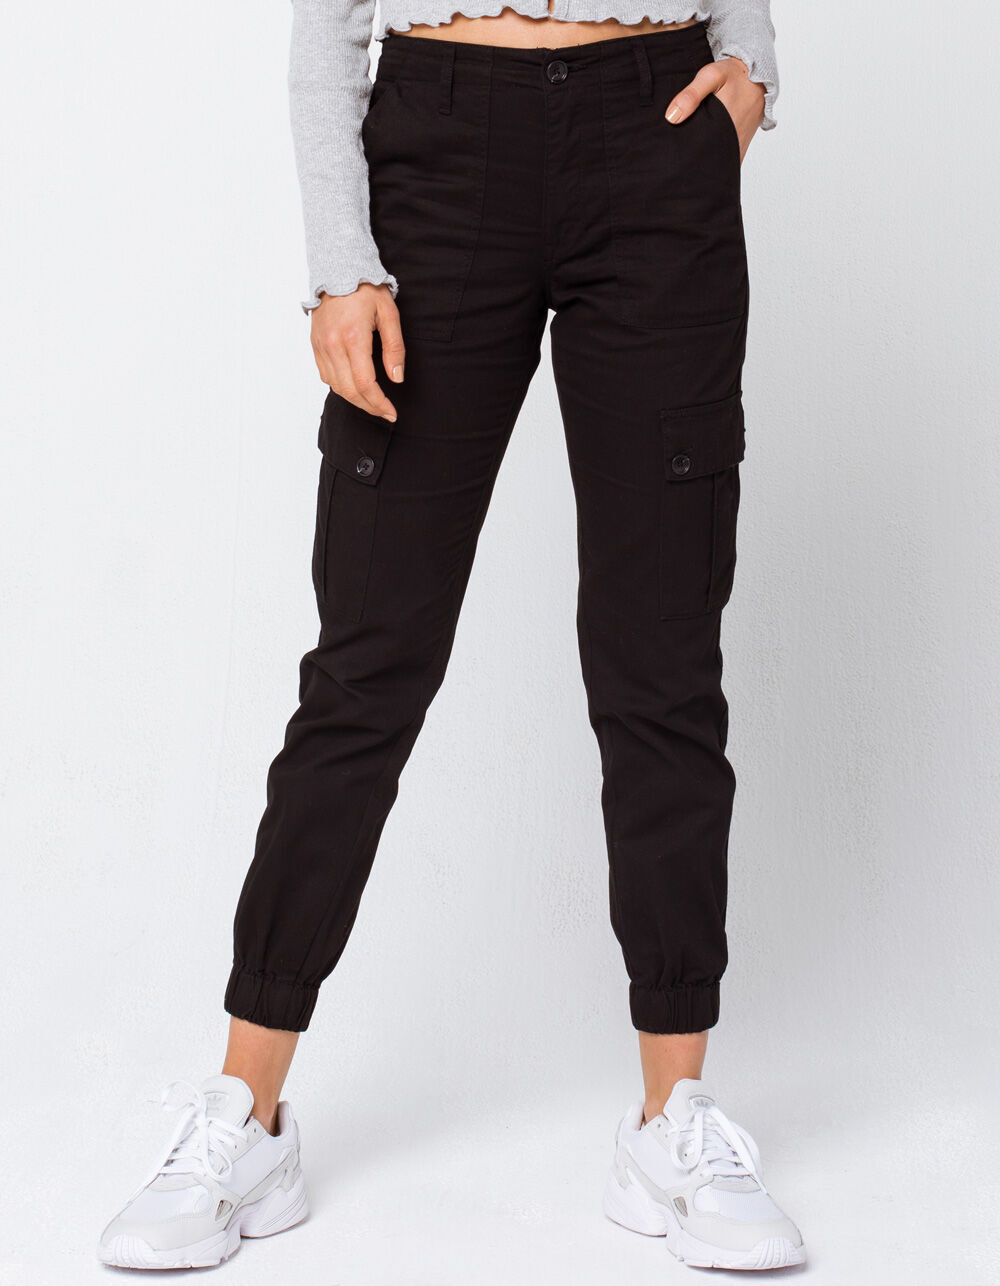 SKY AND SPARROW Twill Womens Black Cargo Pants - BLACK | Tillys